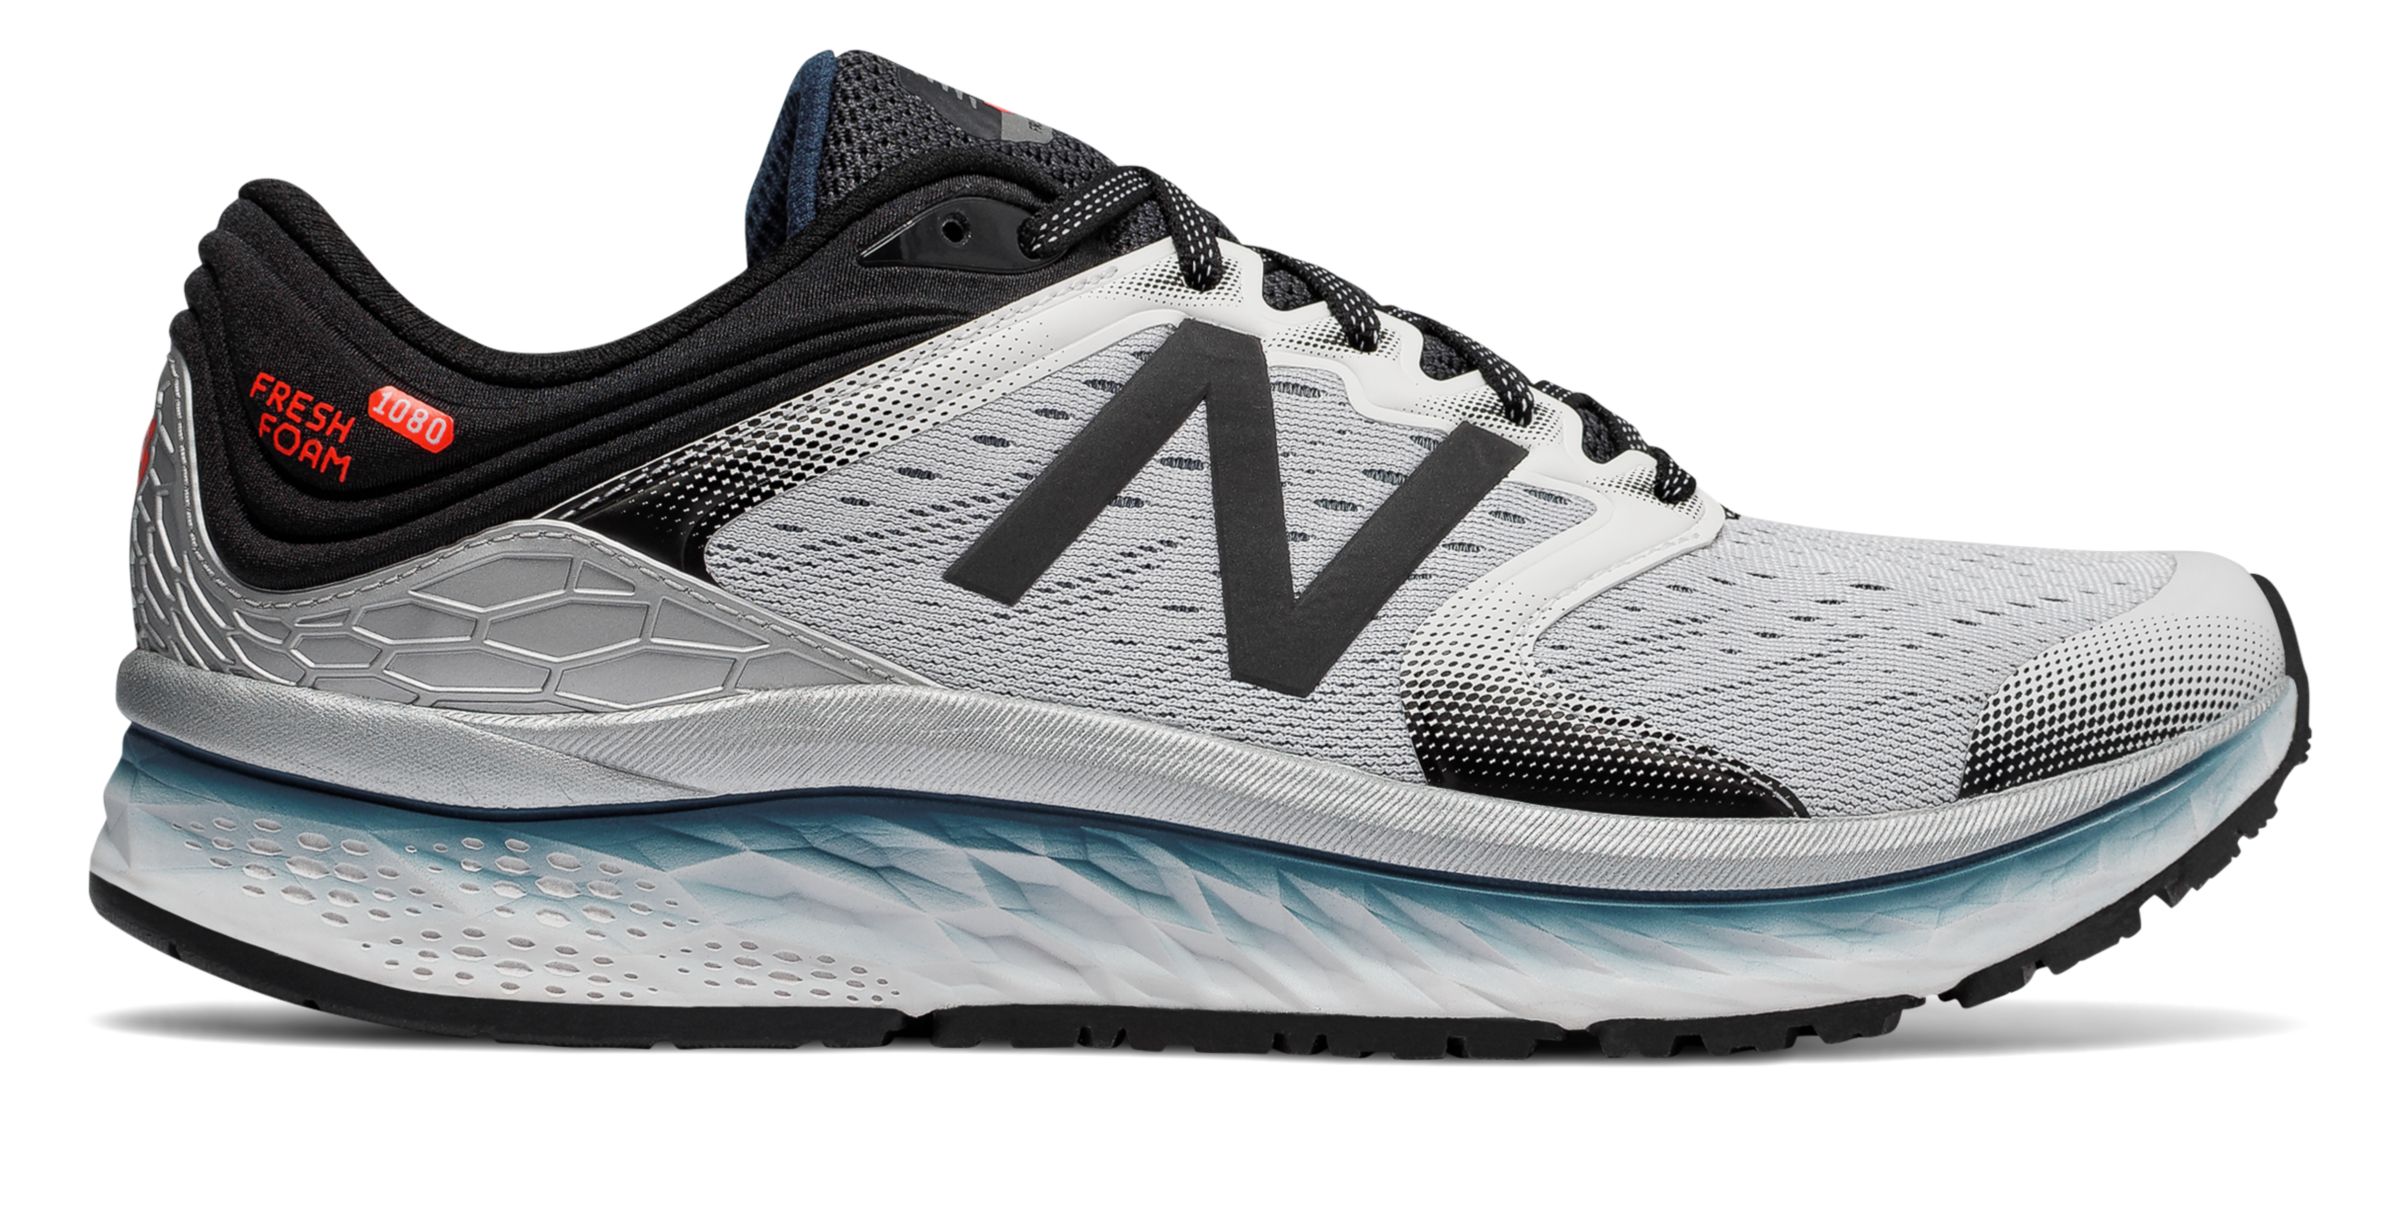 New Balance M1080-V8 on Sale - Discounts Up to 53% Off on M1080WB8 at Joe's New  Balance Outlet